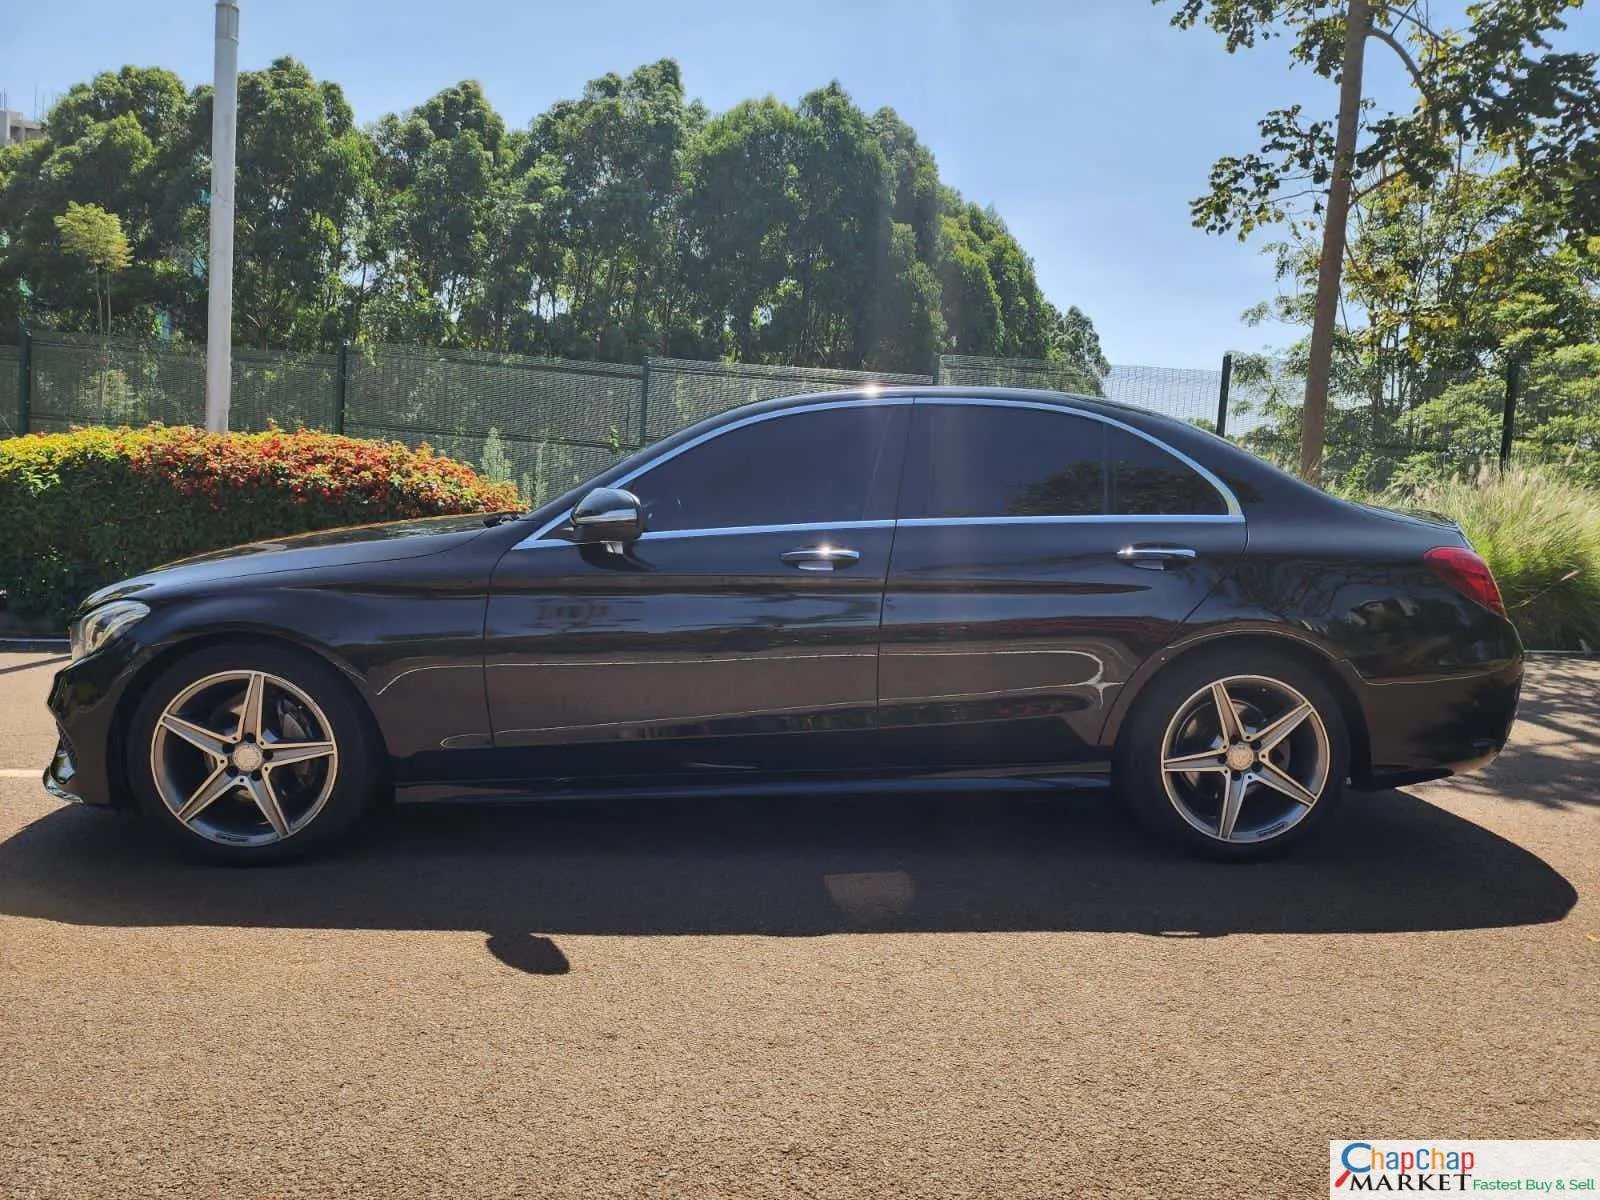 Cars Cars For Sale-Mercedes Benz C180 You Pay 30% DEPOSIT hire purchase installments Trade in OK c180 for sale in kenya 9